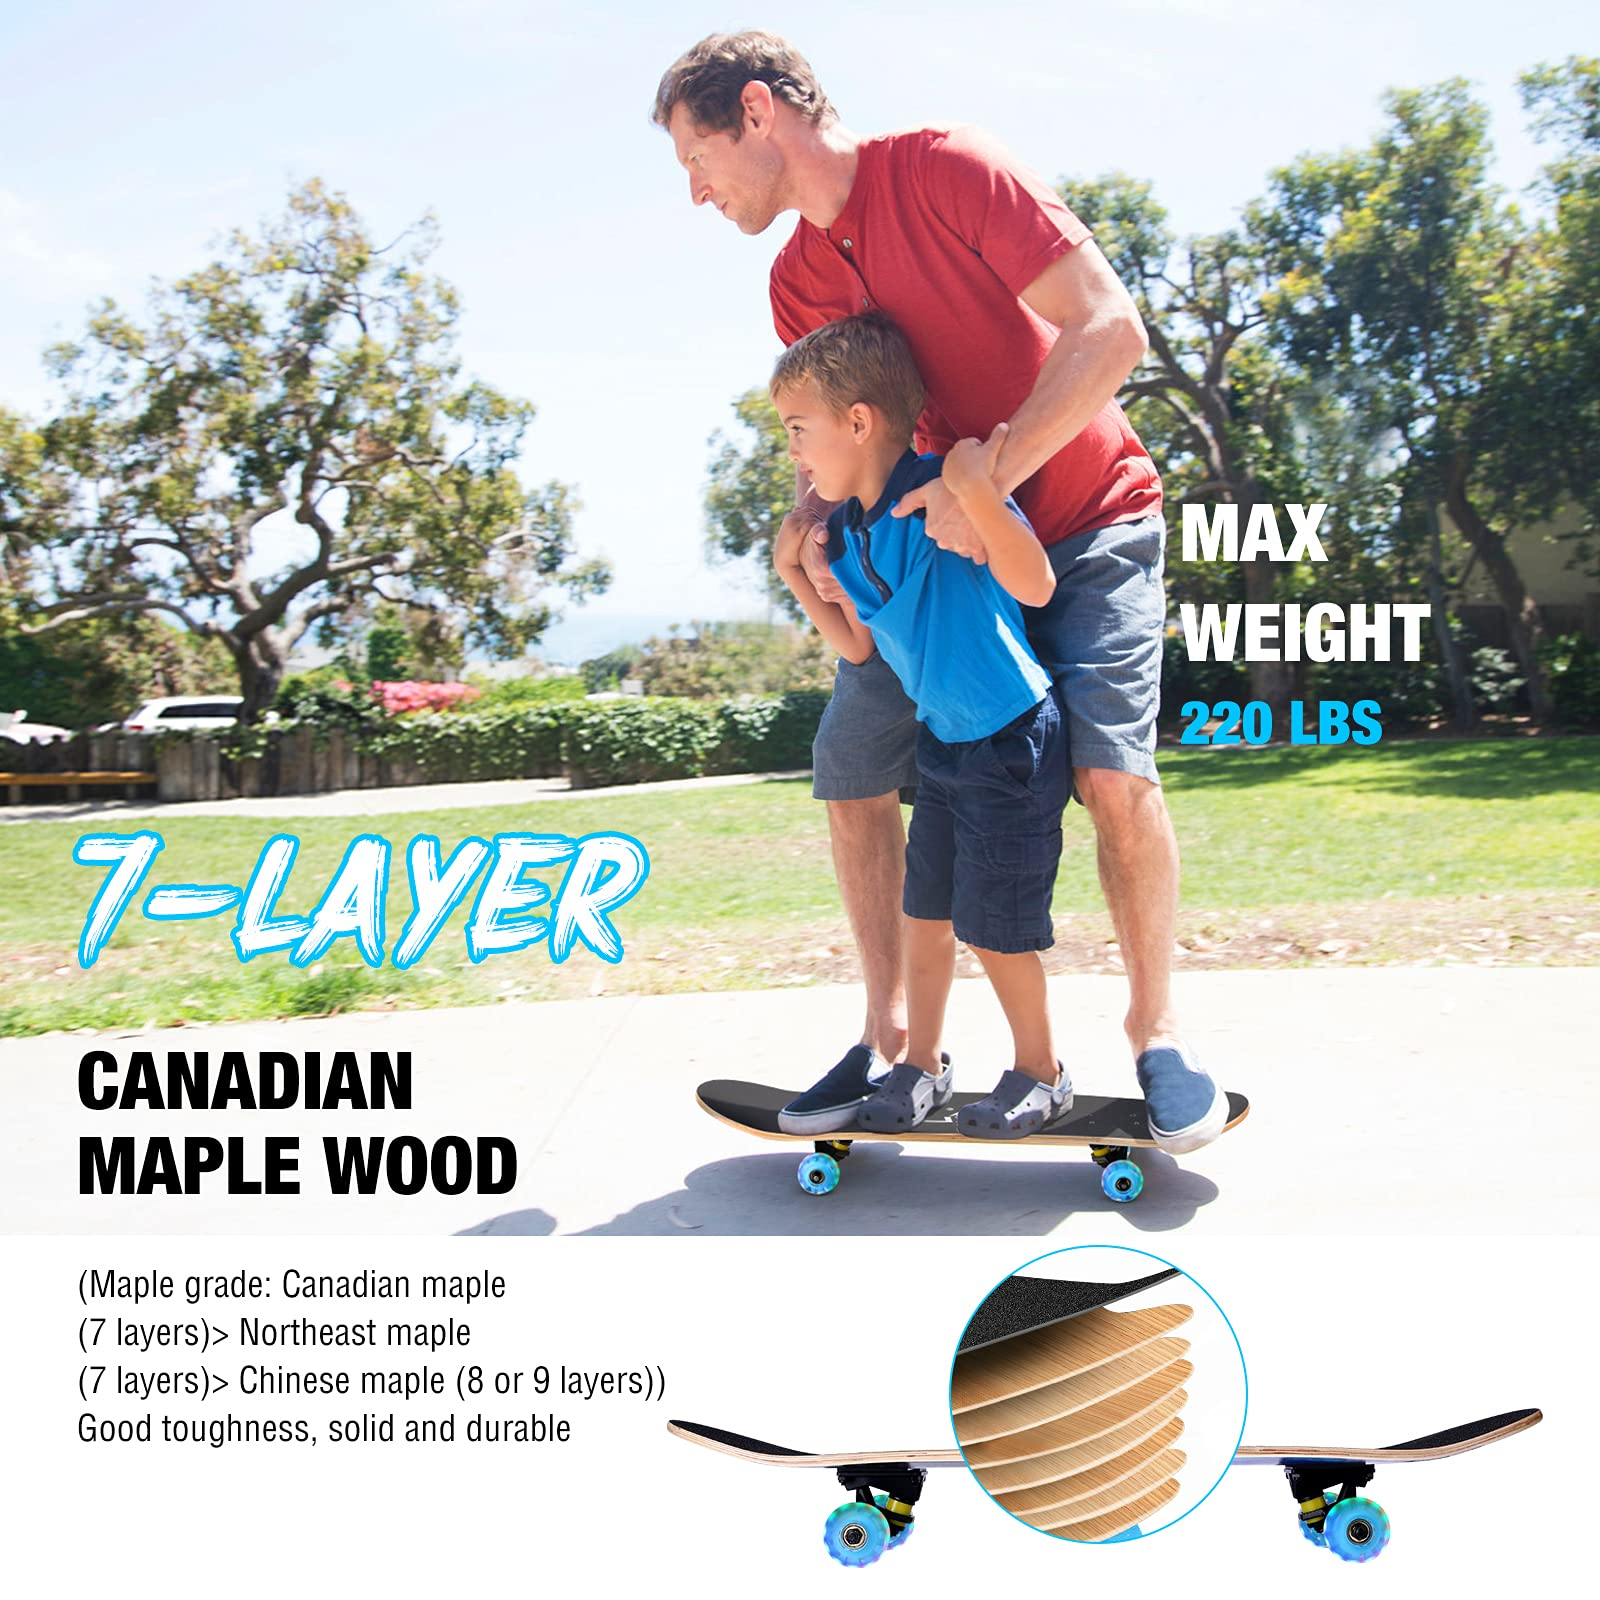 GIEMIT Skateboard with LED Light Up Wheels 31 x 8 Inch Complete Skateboard for Beginners Kids Teens Adults,7 Layers Canadian Maple Wood Deck Standard Skate Boards with All-in-1 Skate T-Tool 